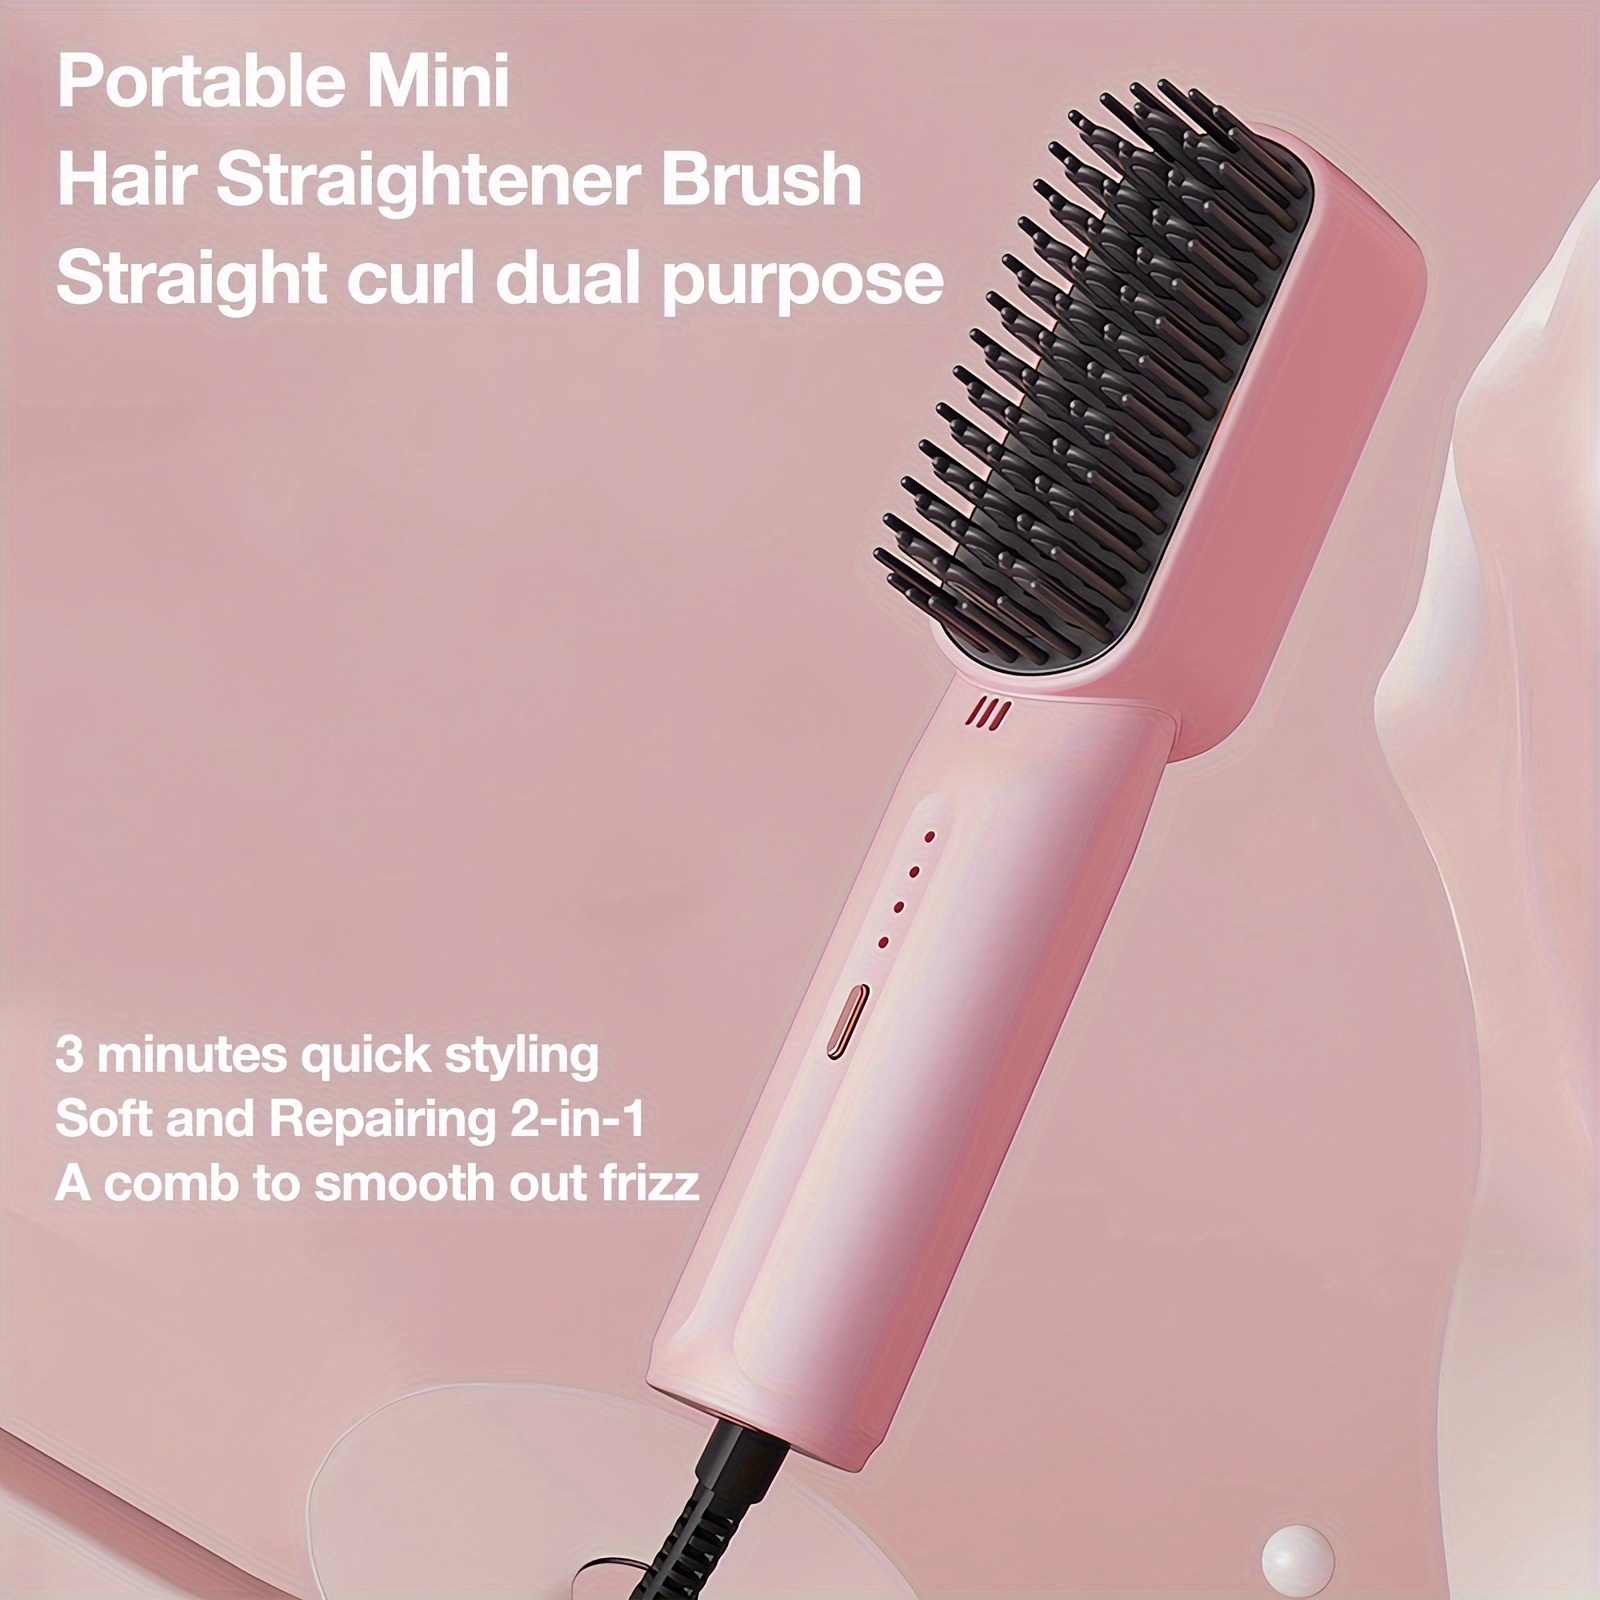 

New Portable Straightener Comb - Fashionable Design, Easy Styling - Negative Ion Technology, 4 Gears Intelligent Quick Heating, Suitable For All Hair Types Suitable For Travel Convenient To Carry.